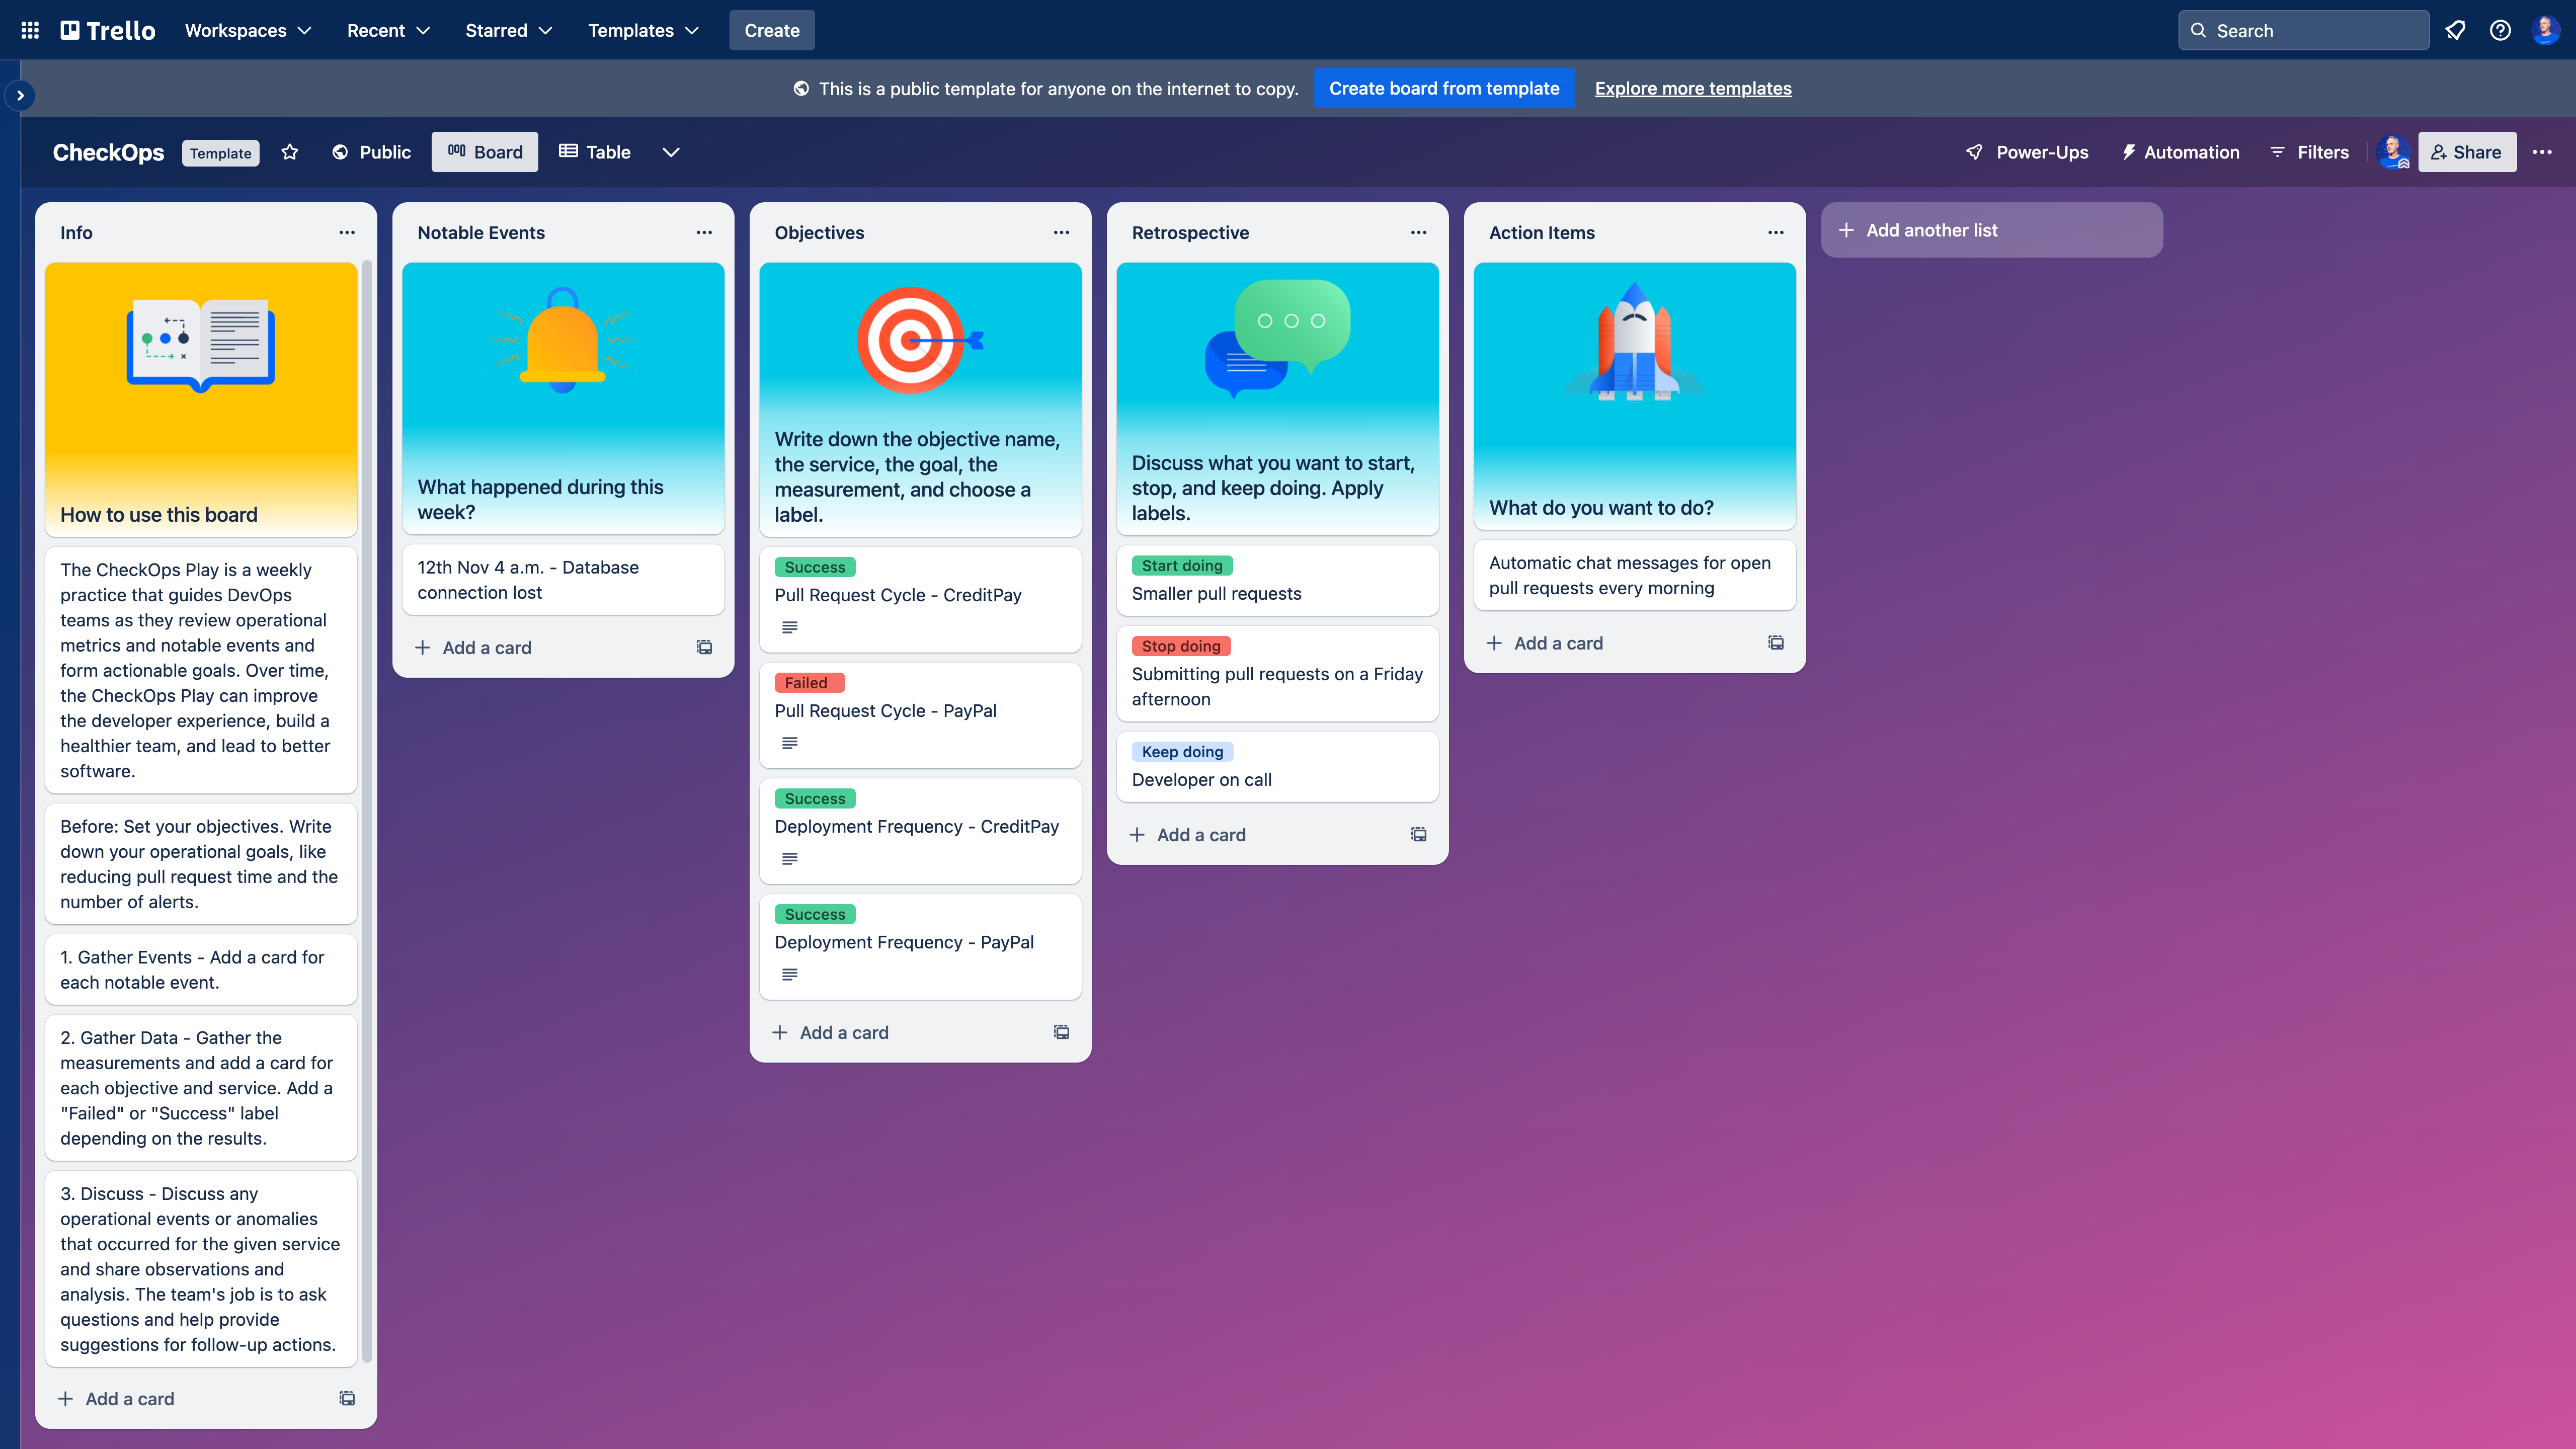 You can run a weekly CheckOps report in Trello, too.